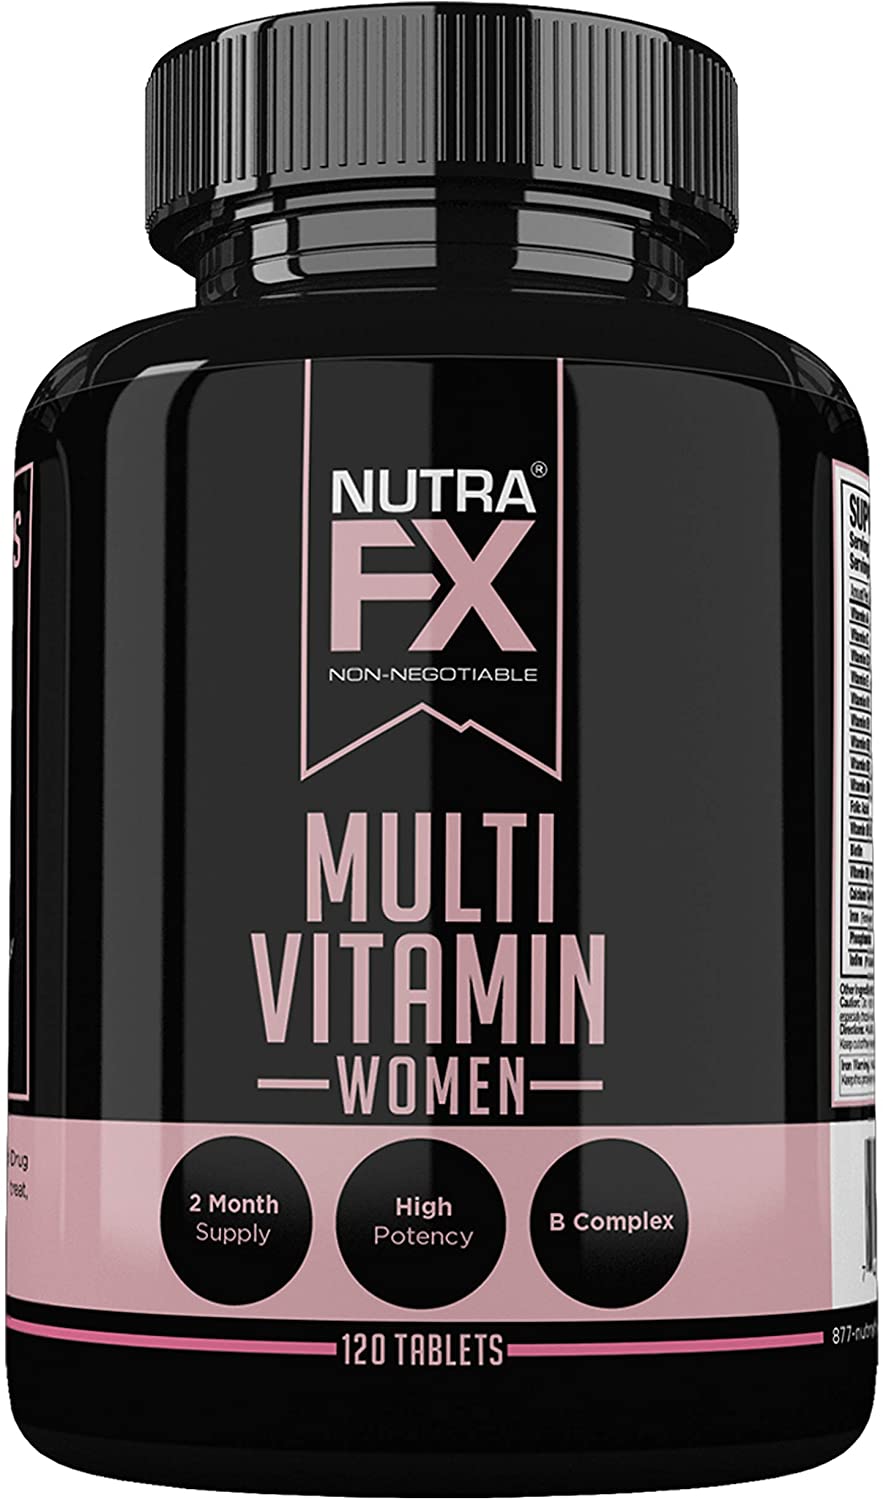 FX Supplements | 8321 219th St SE Suite B, Woodinville, WA 98072, USA | Phone: (877) 688-7239